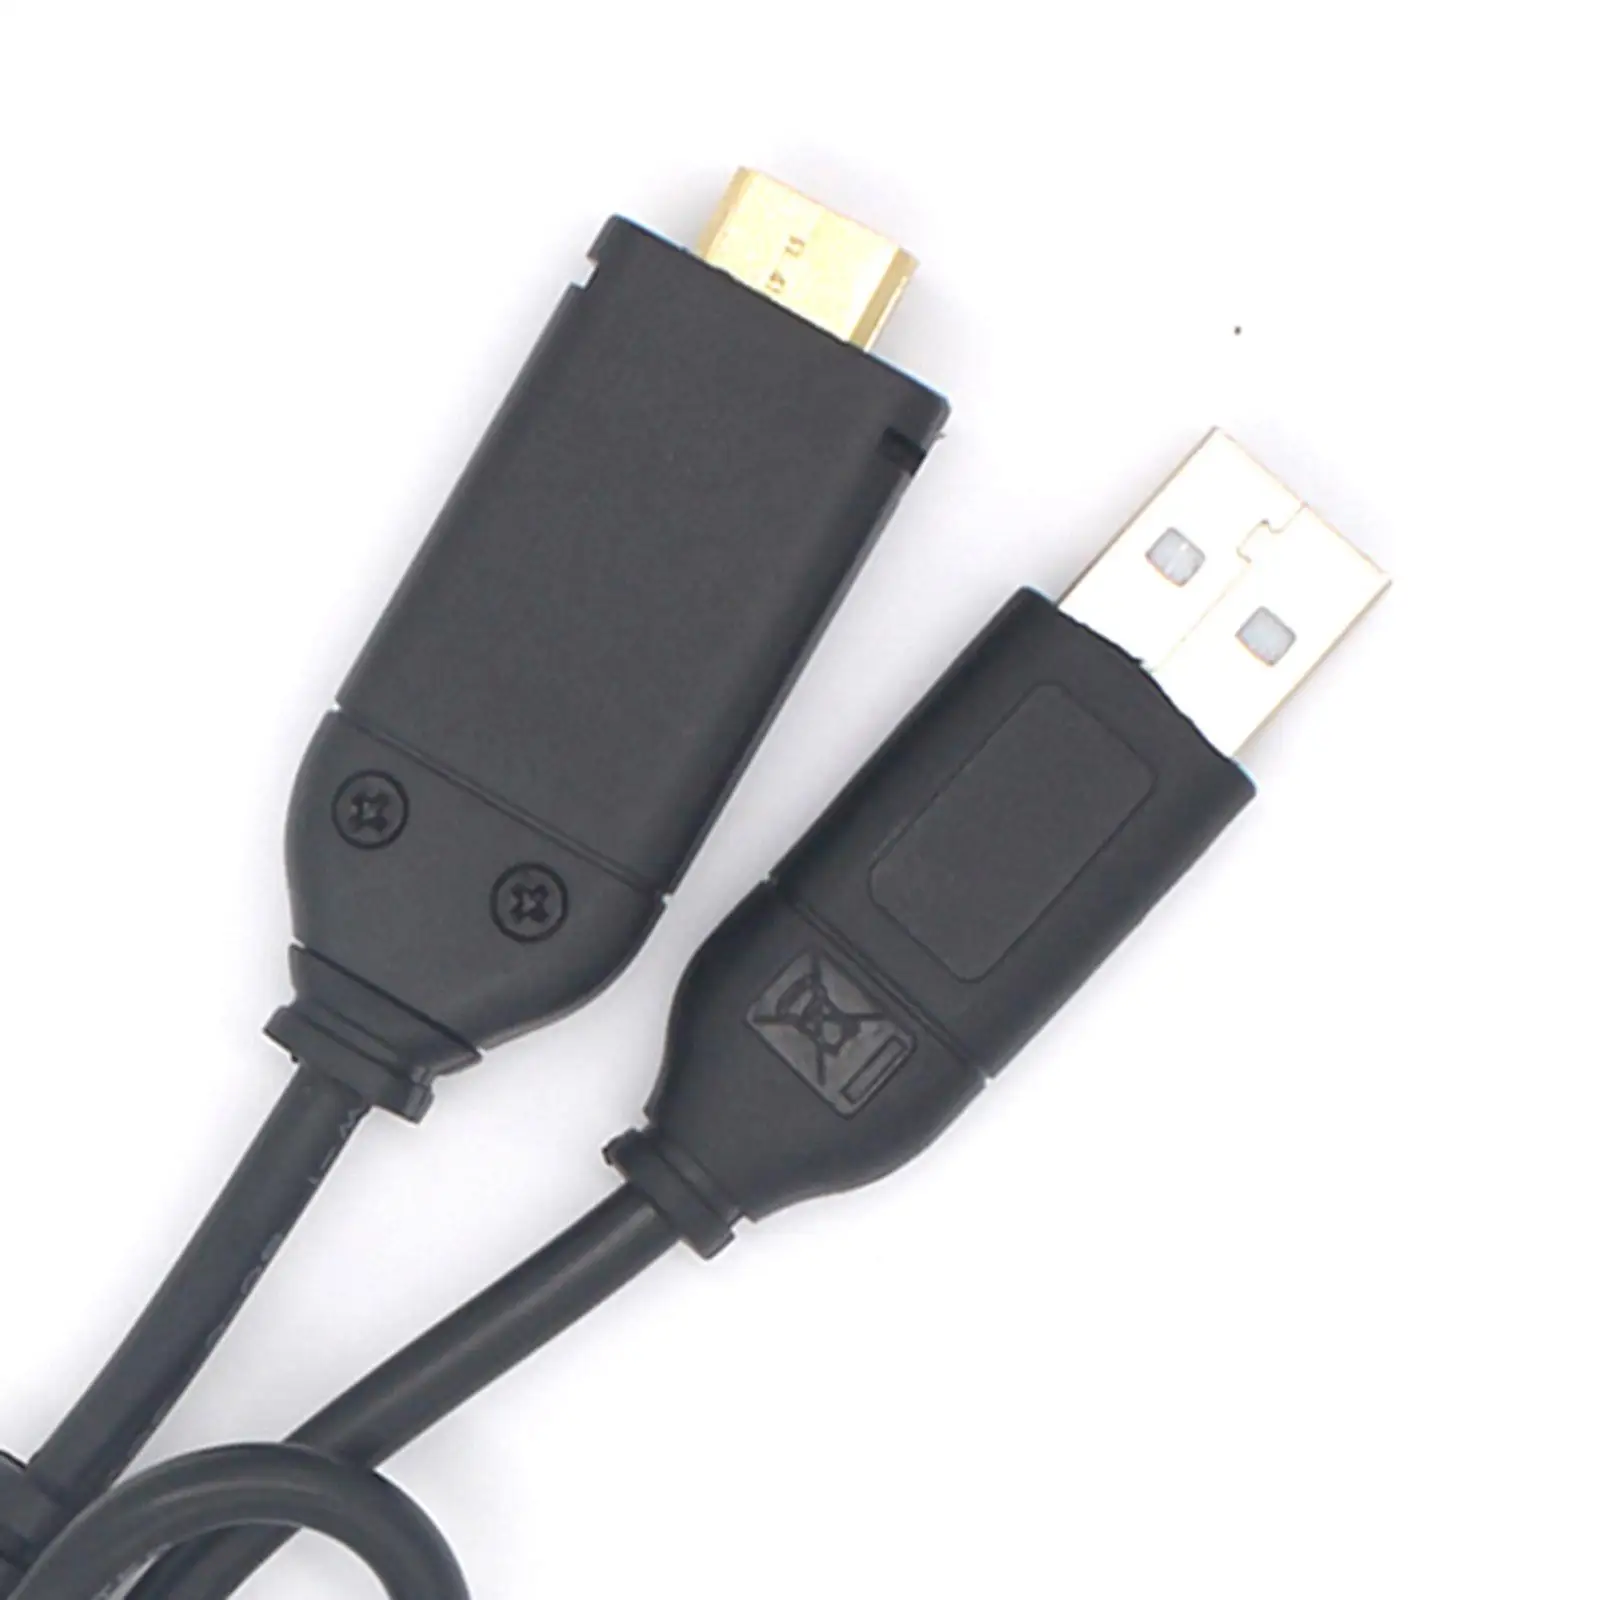 Replaces Premium Repair Parts Data Line Connector Camera USB Cable Camera USB Data Transfer Cable for Nv100HD 106D Camera Parts